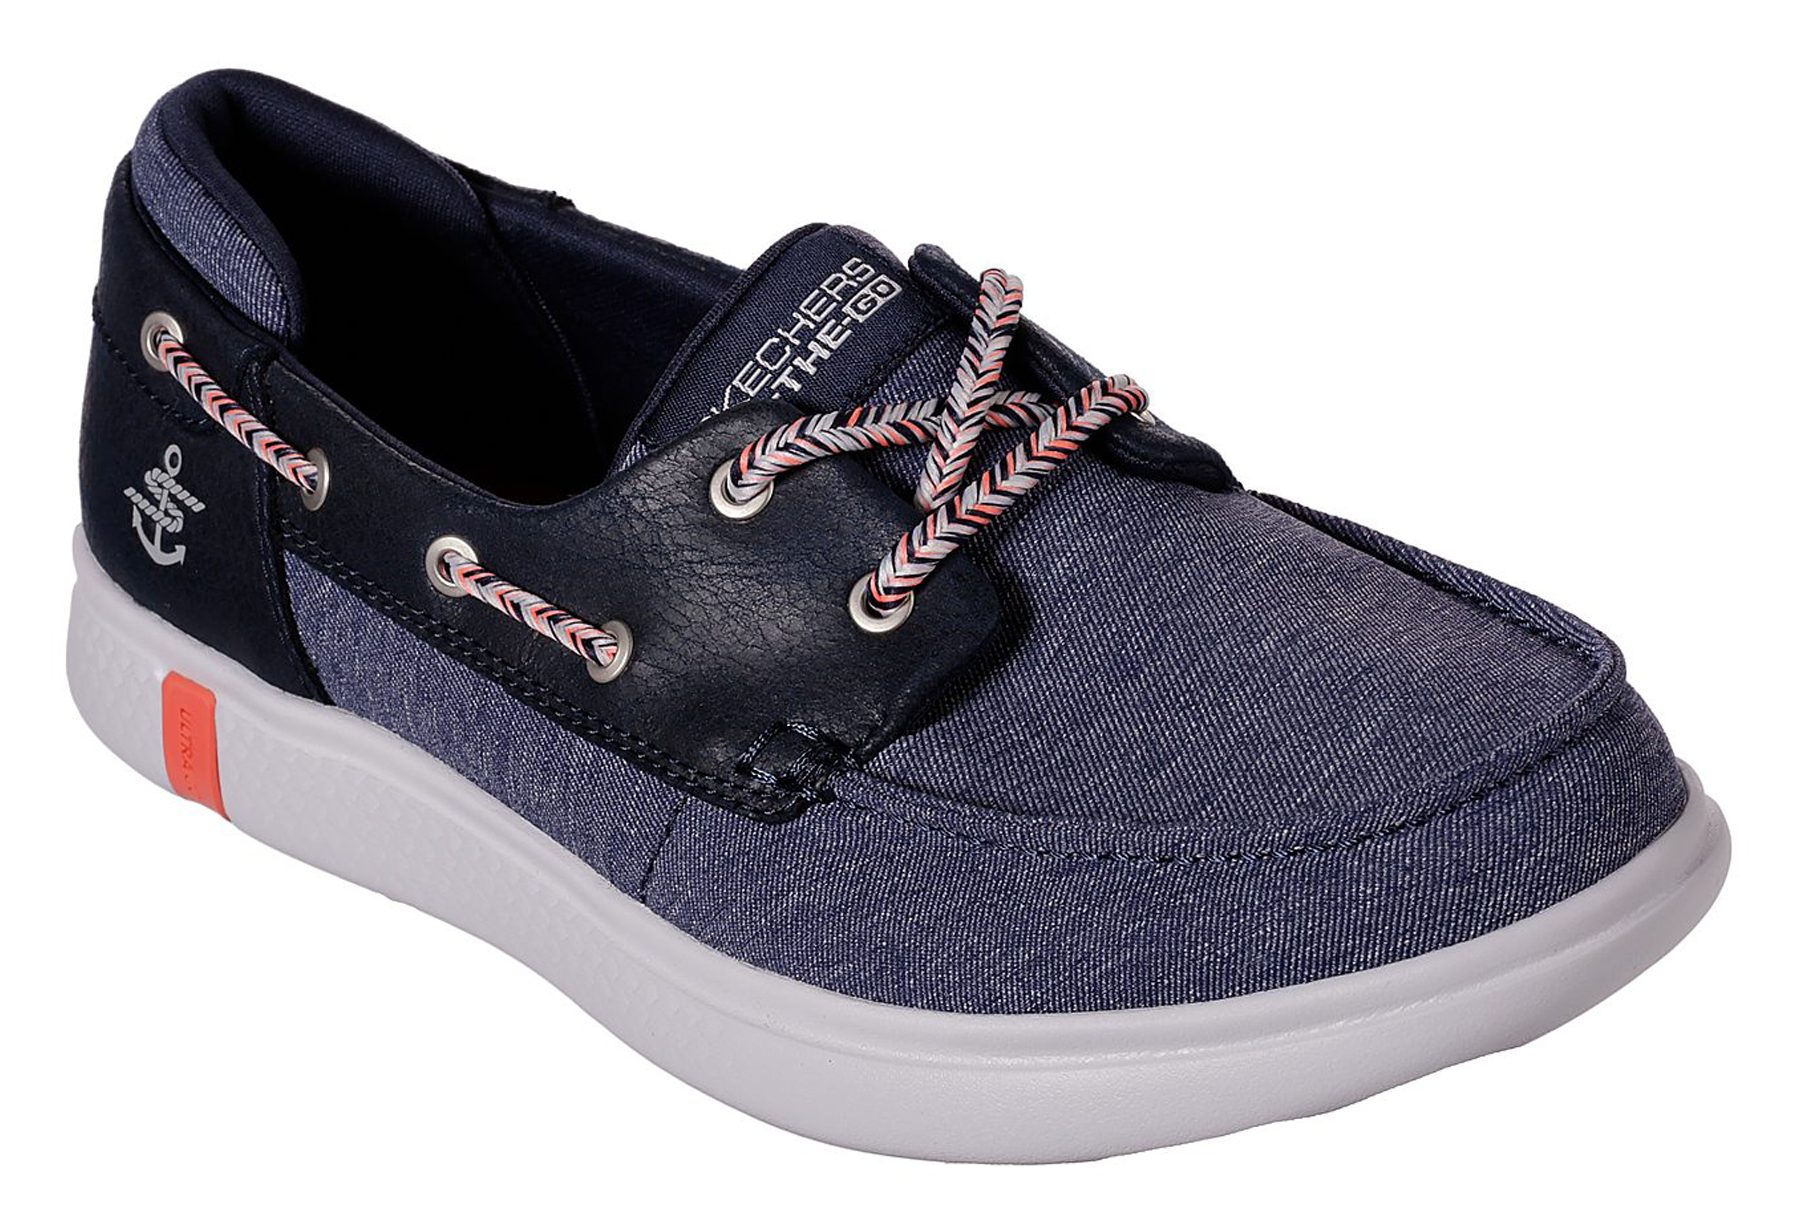 Skechers On the GO Glide Ultra - Playa Navy 16110 NVY - Boat Shoes ...